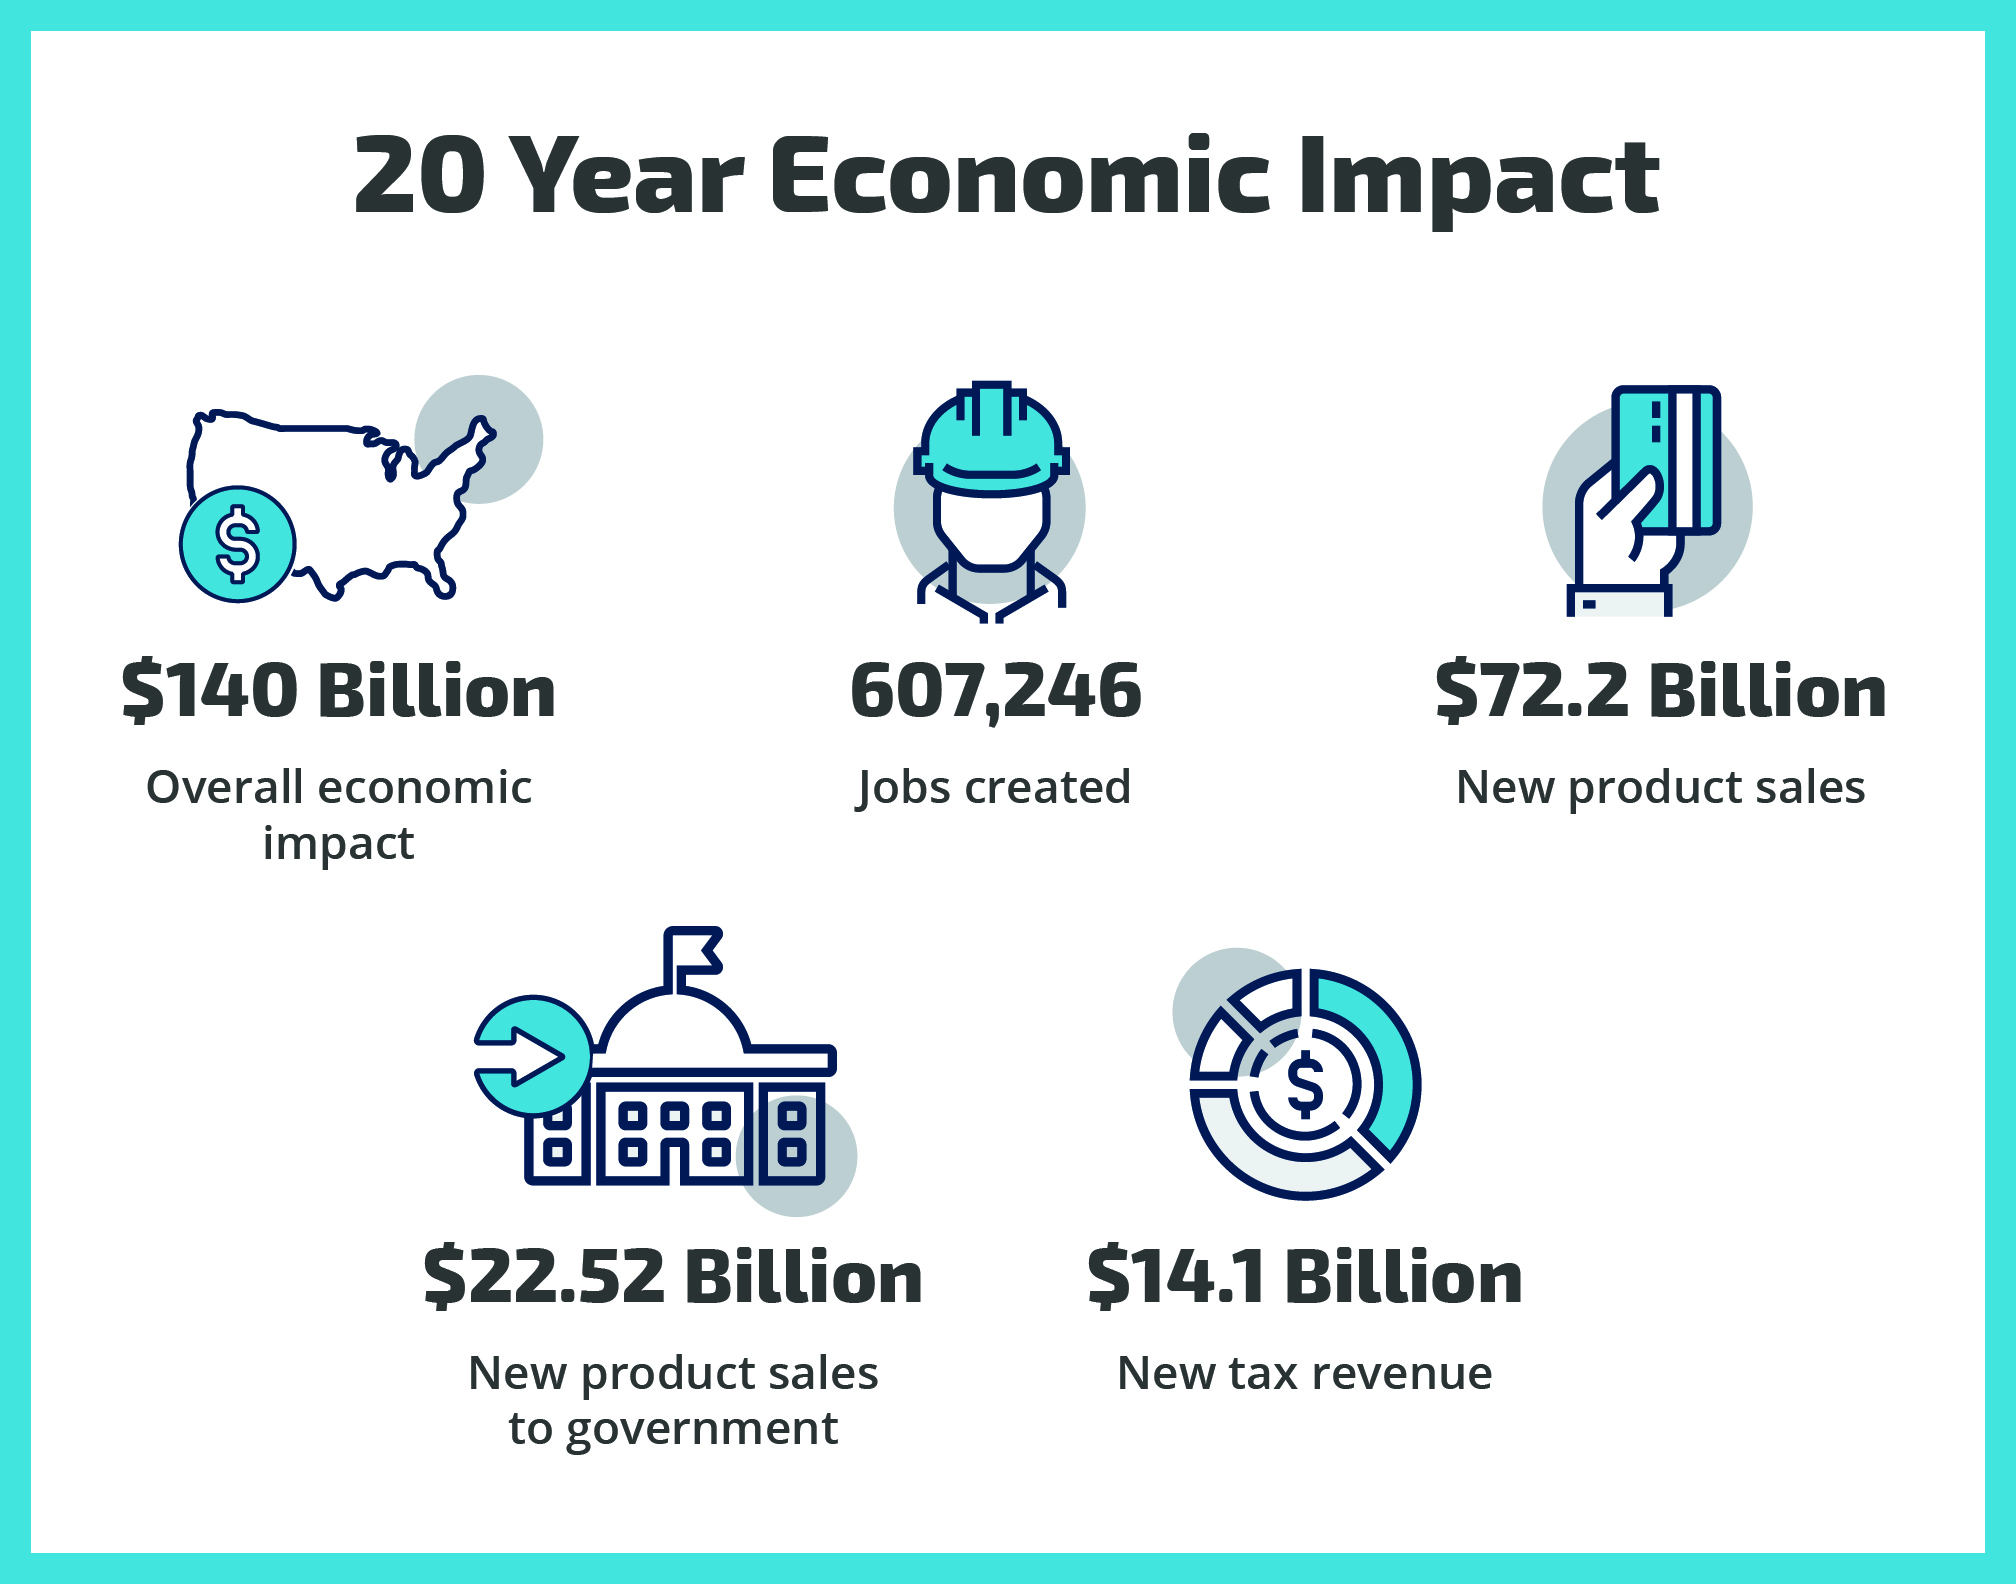 Sandia National Laboratories’ Cooperative Research and Development Agreements and Patent License Agreements have resulted in a $140 billion economic impact since the year 2000.